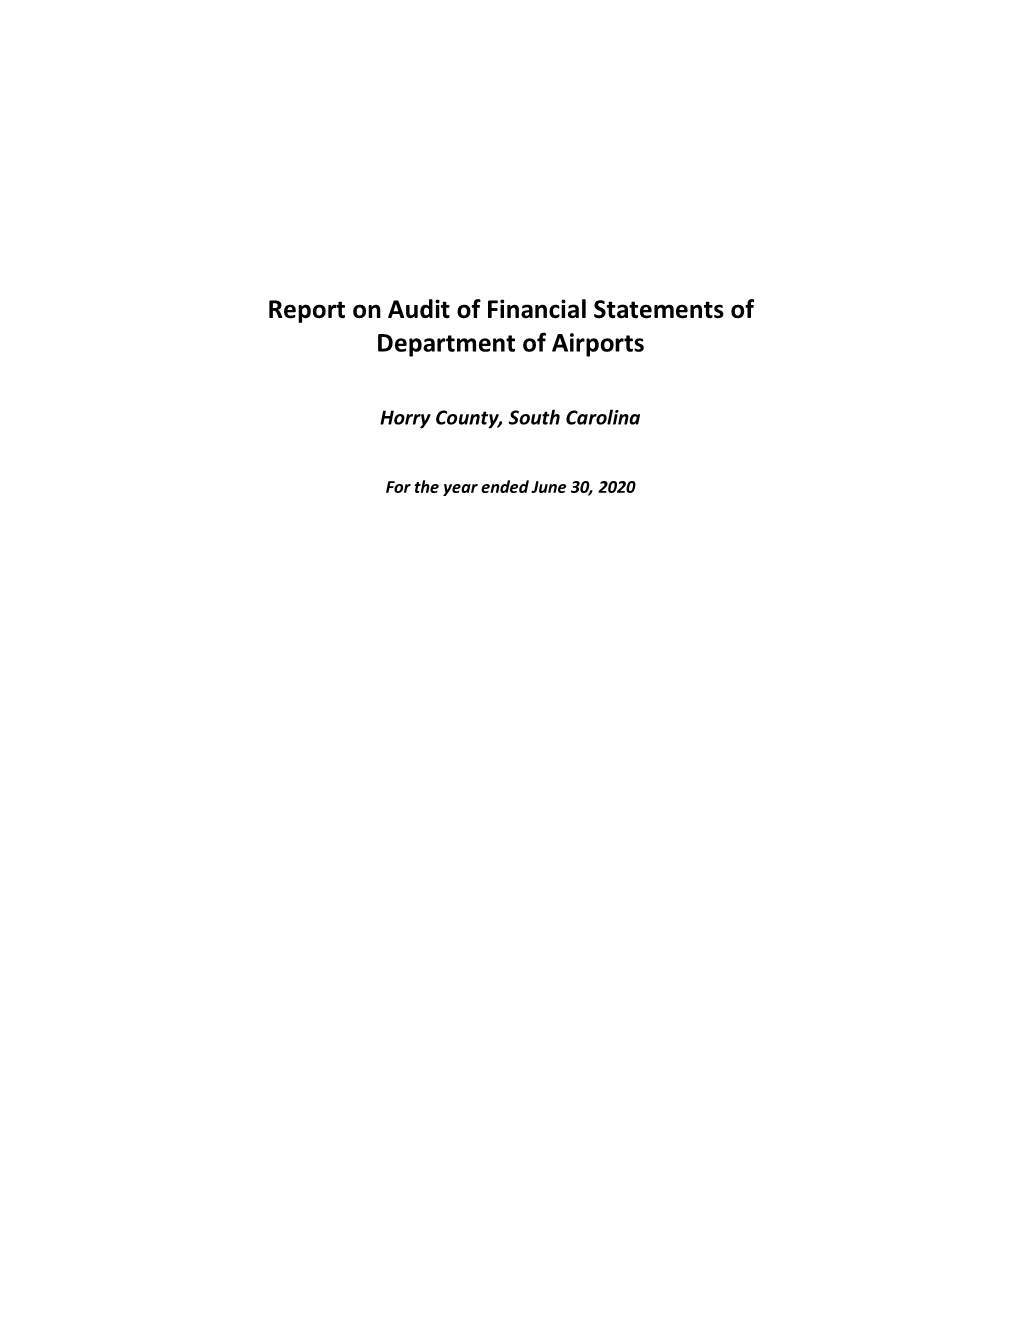 Report on Audit of Financial Statements of Department of Airports